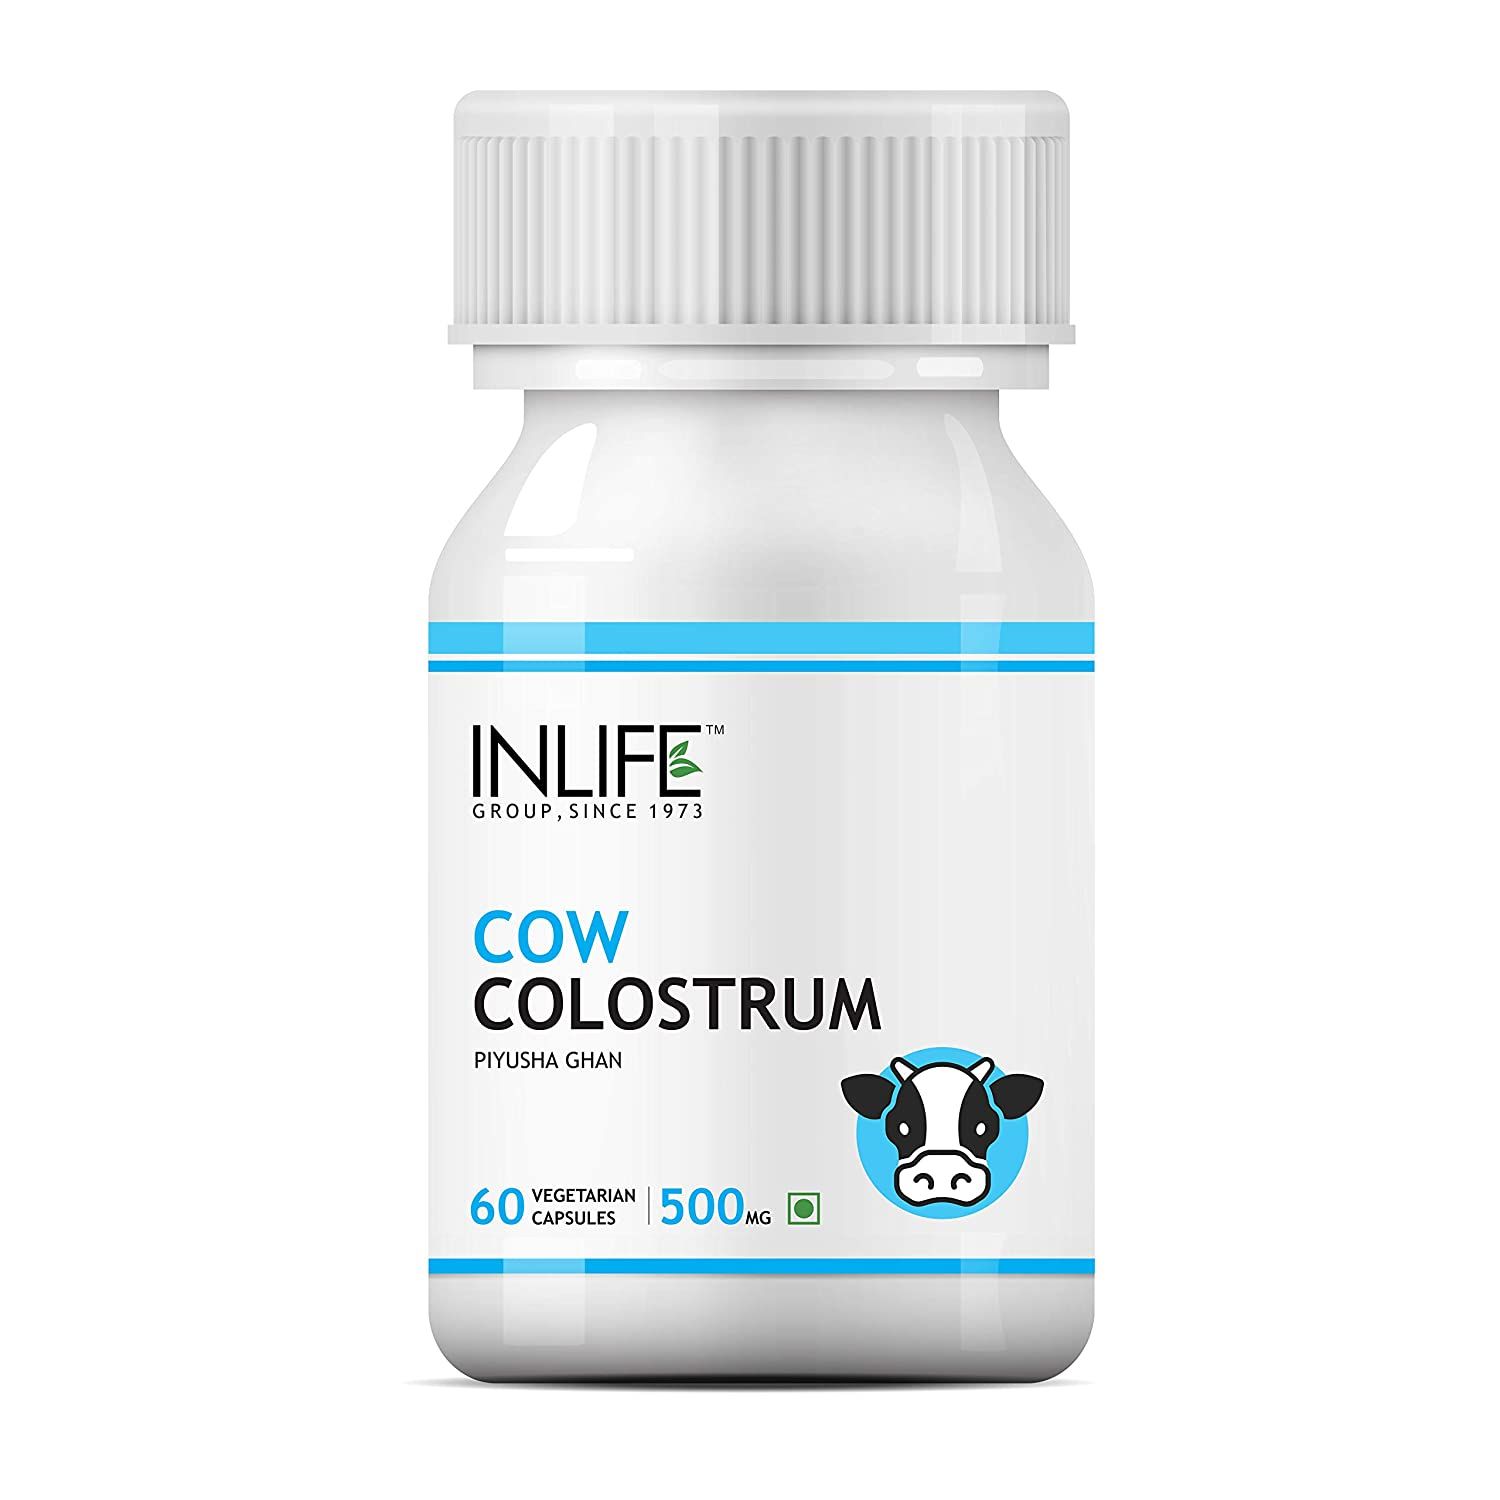 Inlife Cow Colostrum Supplement Image